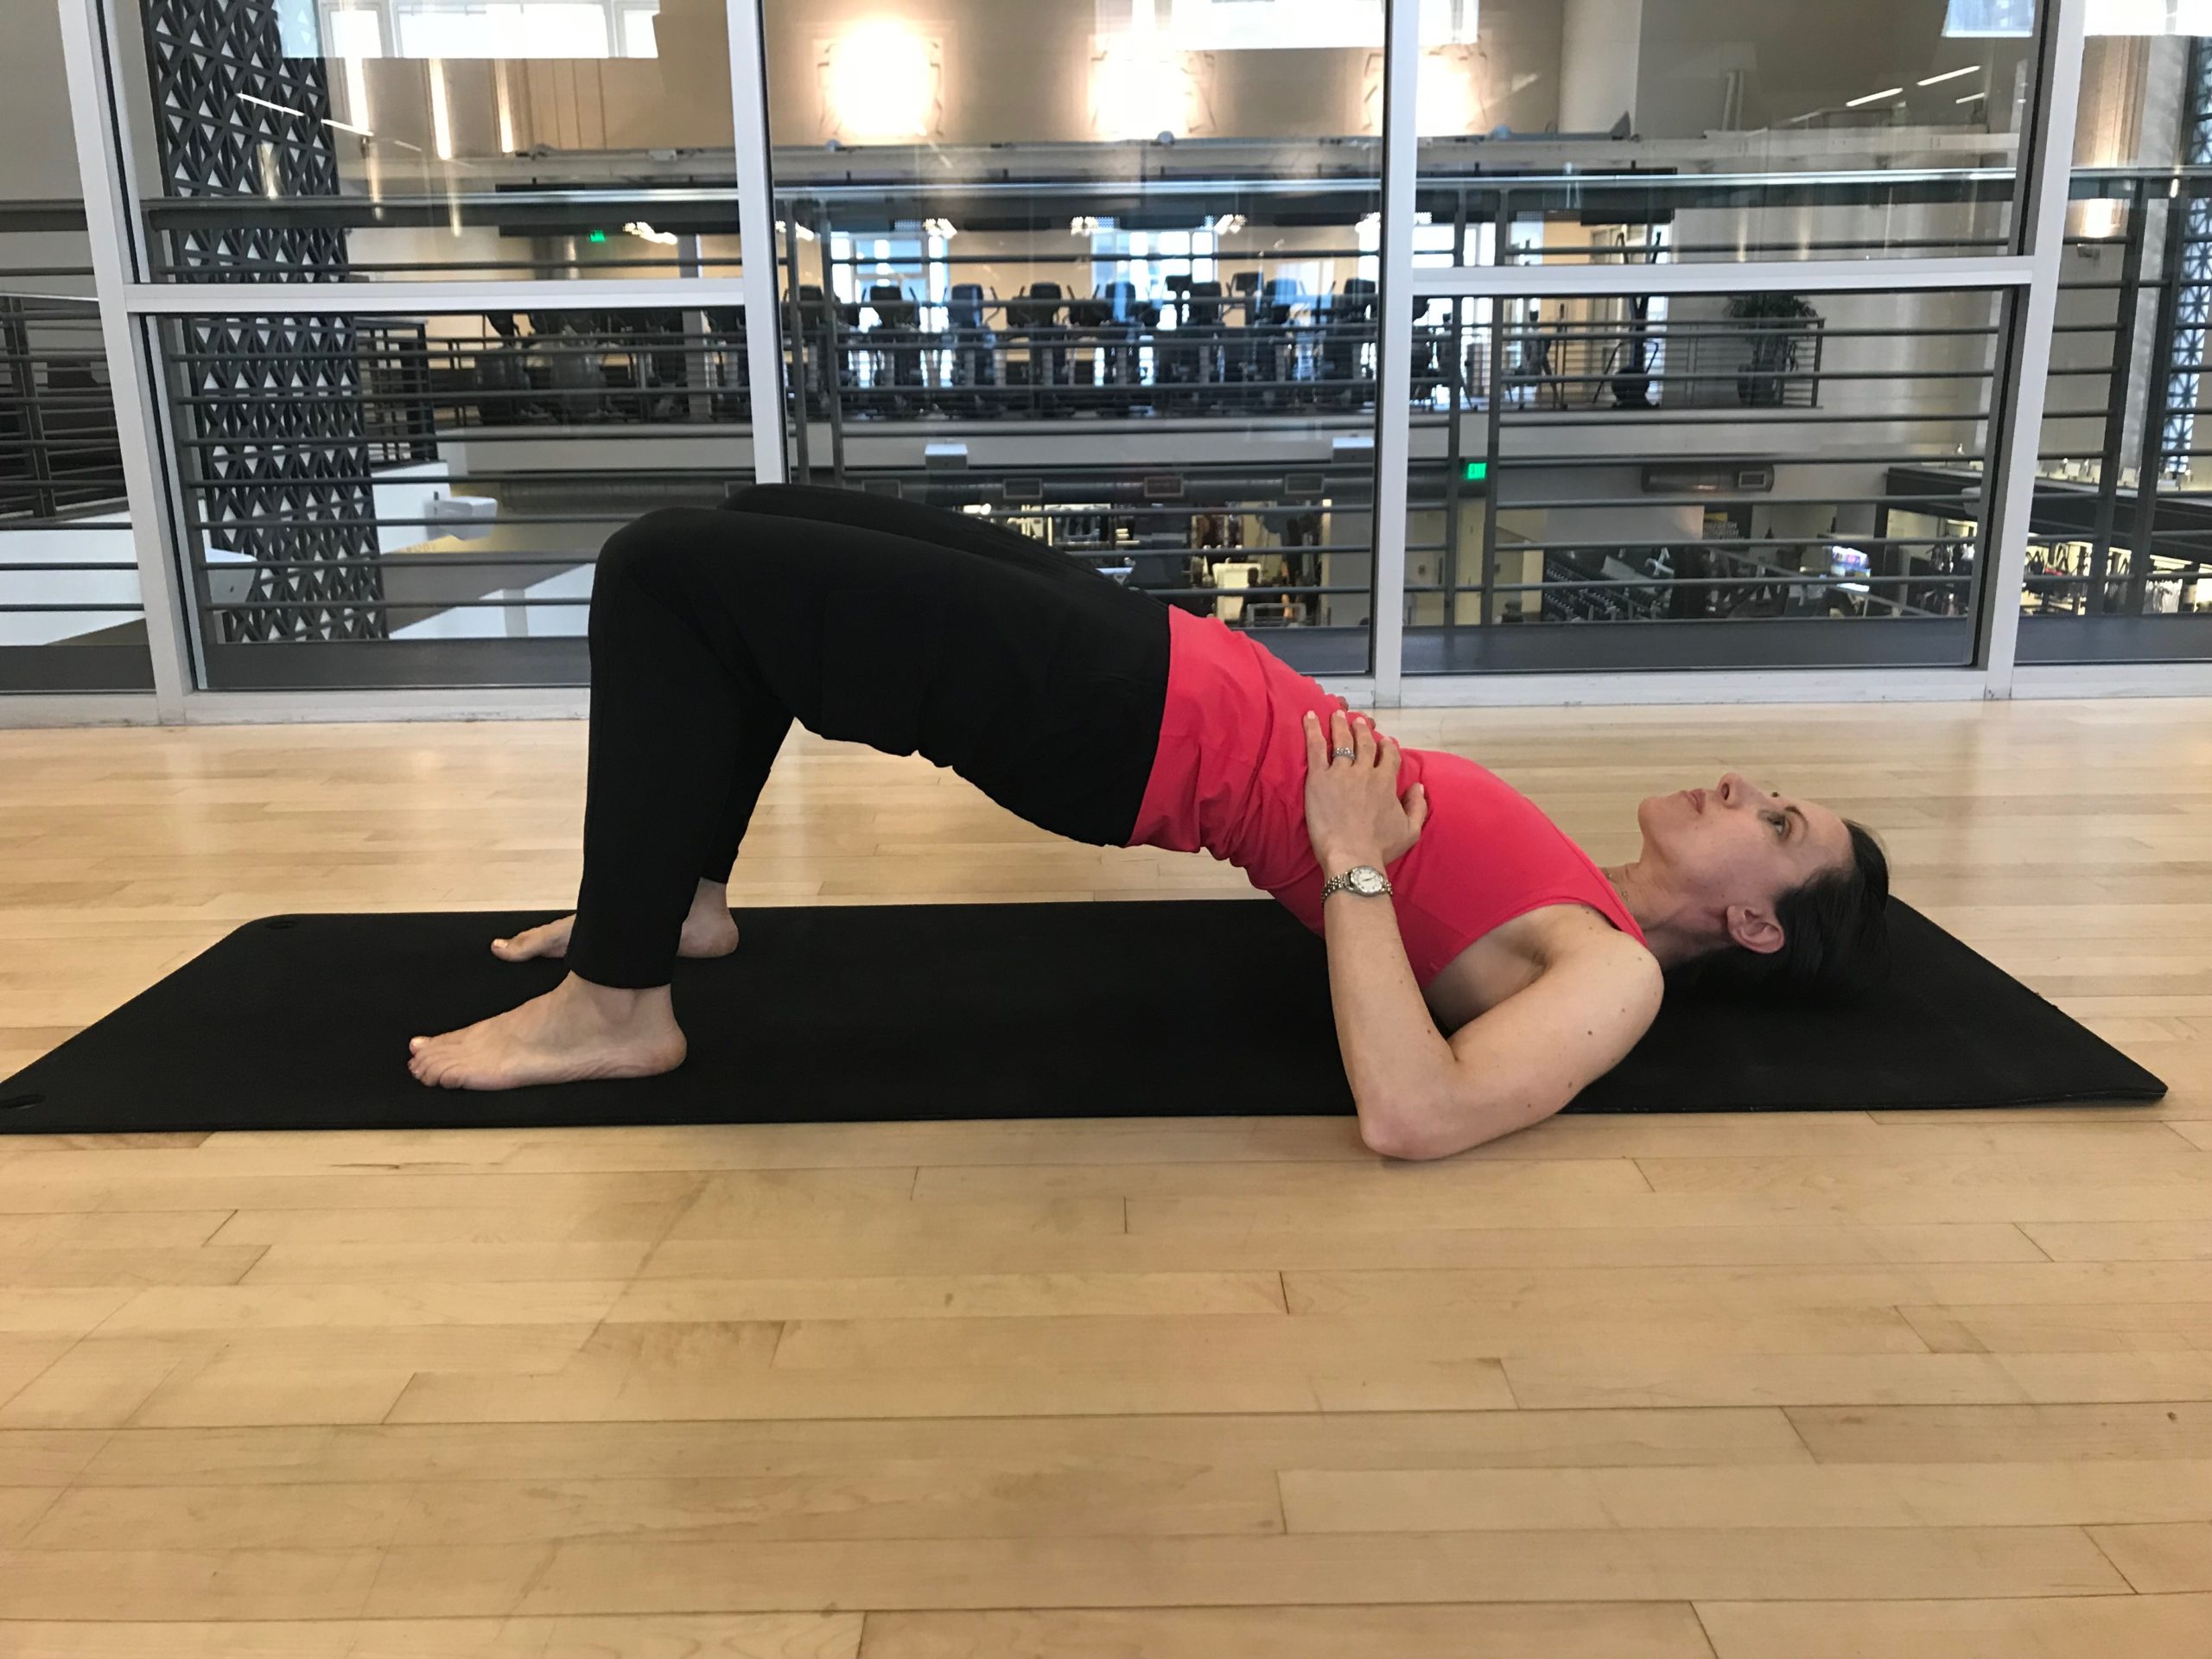 Exercises to Help with Pelvic Pain in Pregnancy - Keep Your Pelvis Strong